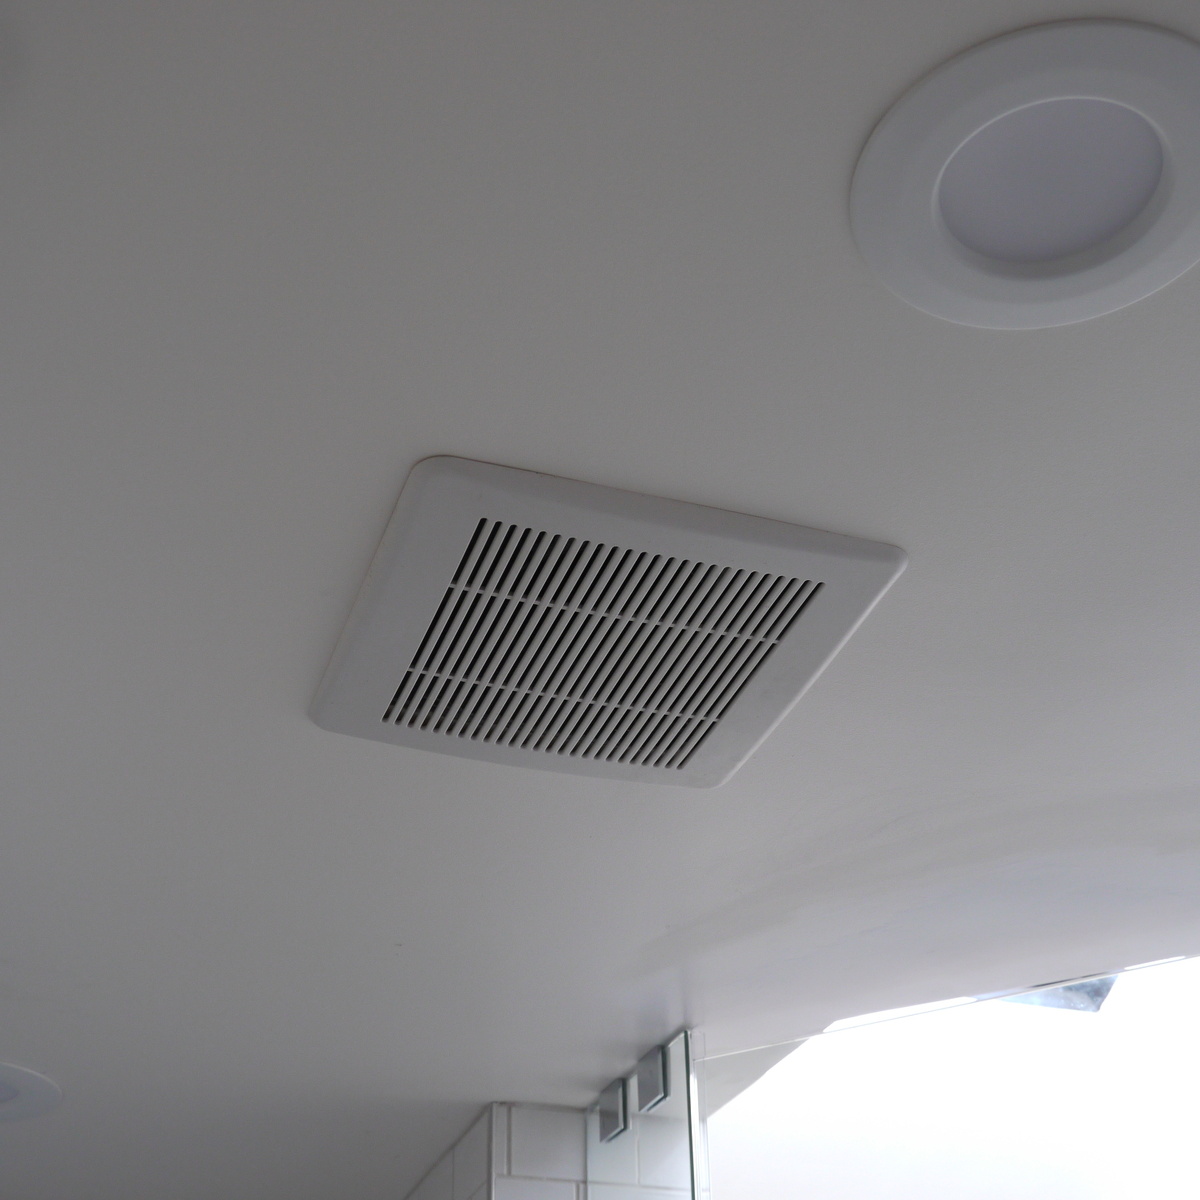 Where Should An Exhaust Fan Be Located In The Bathroom